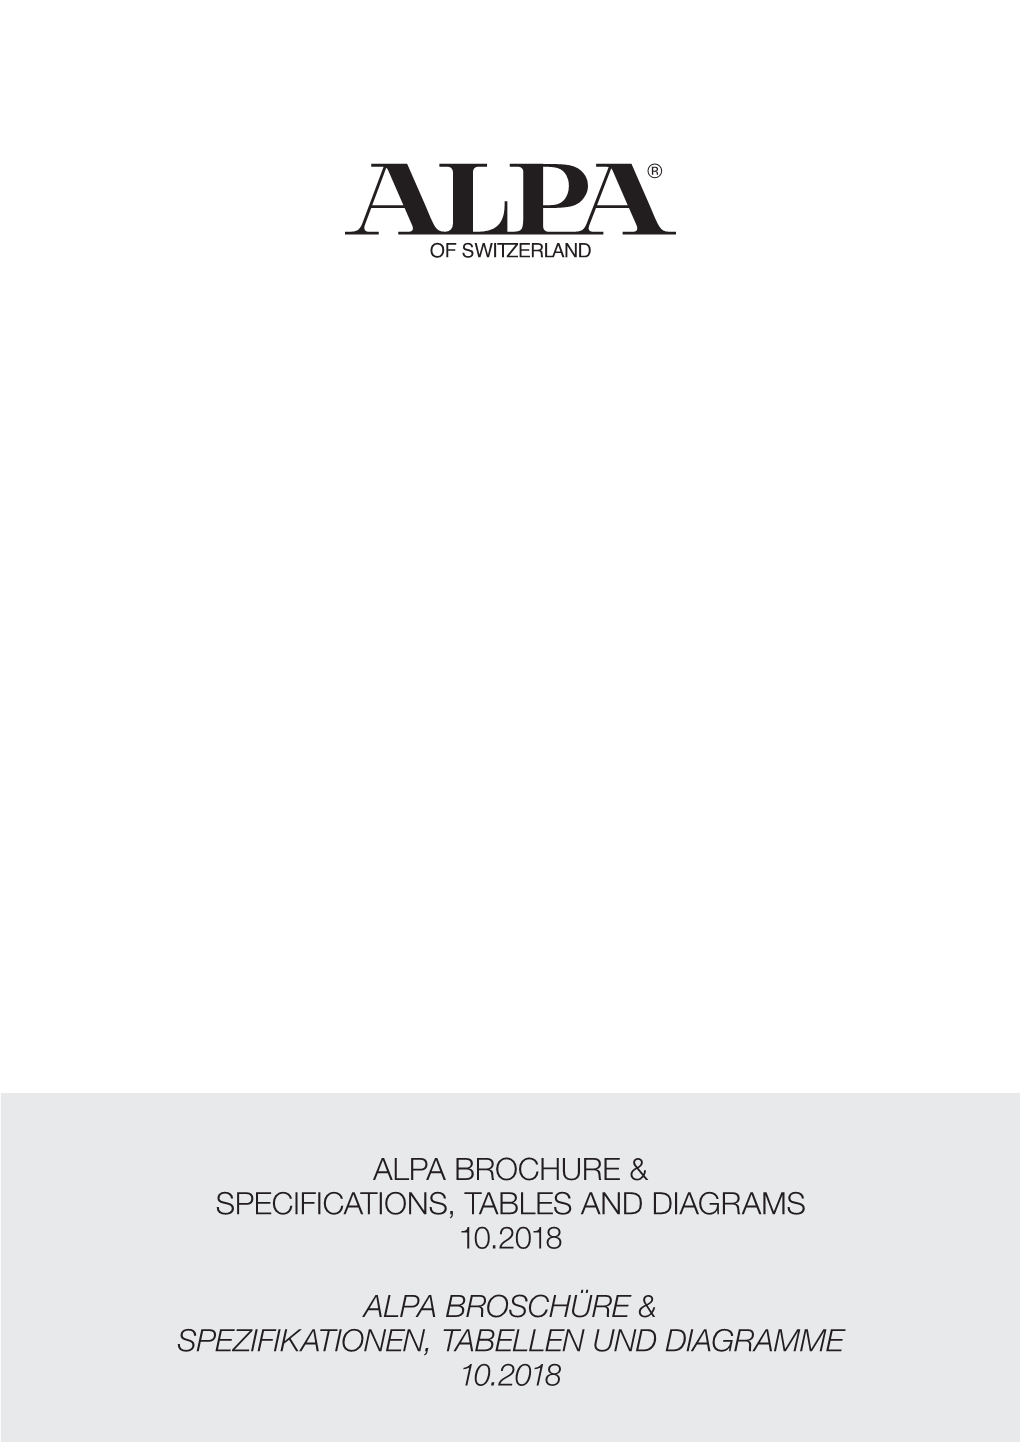 Alpa Brochure & Specifications, Tables And